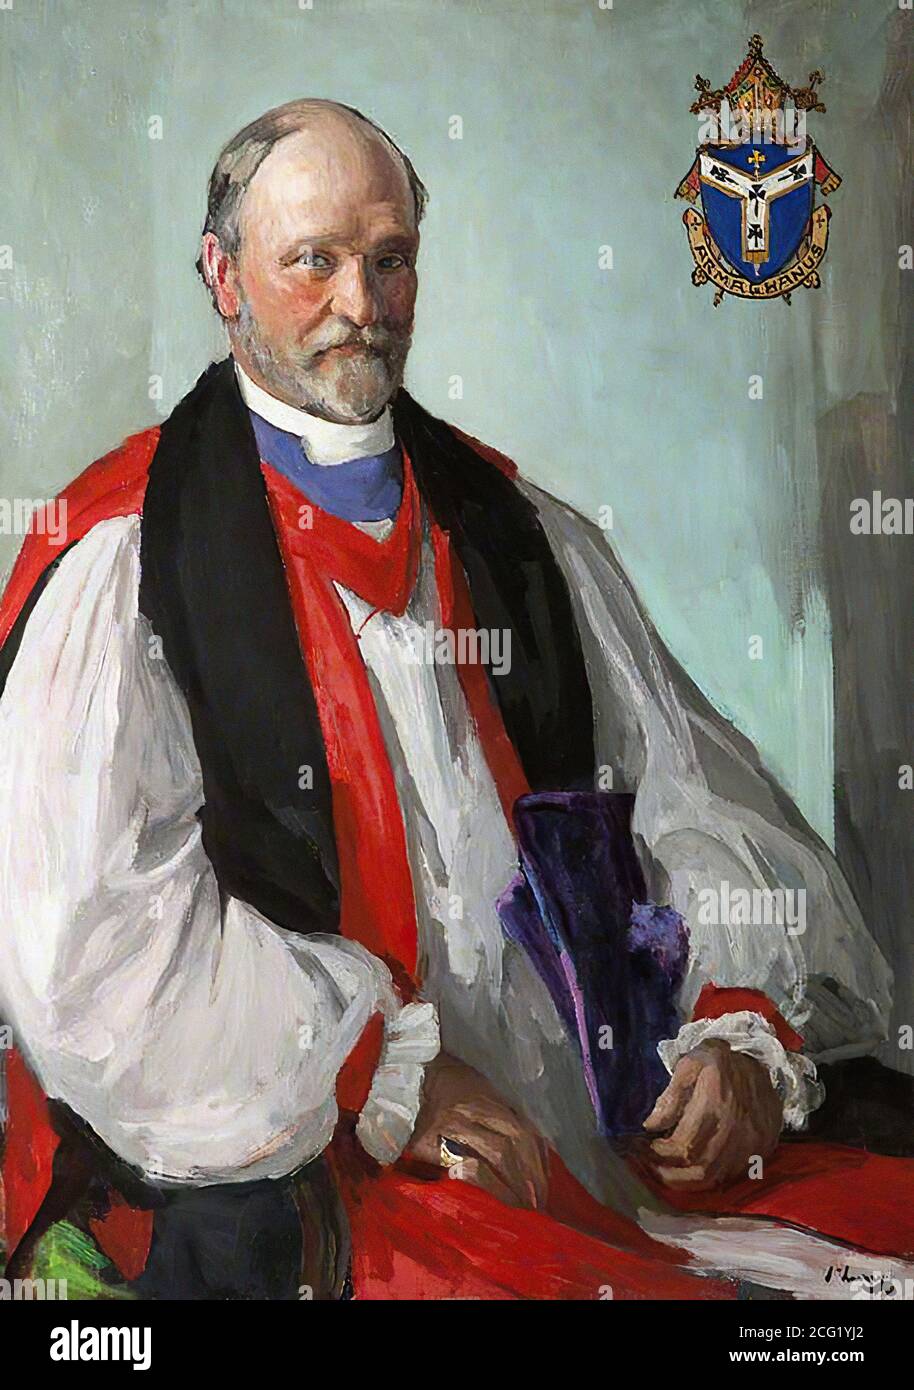 lavery, sir john - Most Reverend Charles Frederick D'Arcy, Archbishop of Armagh and Primate of All Ireland - 23822787005 944be5d70f o Stock Photo